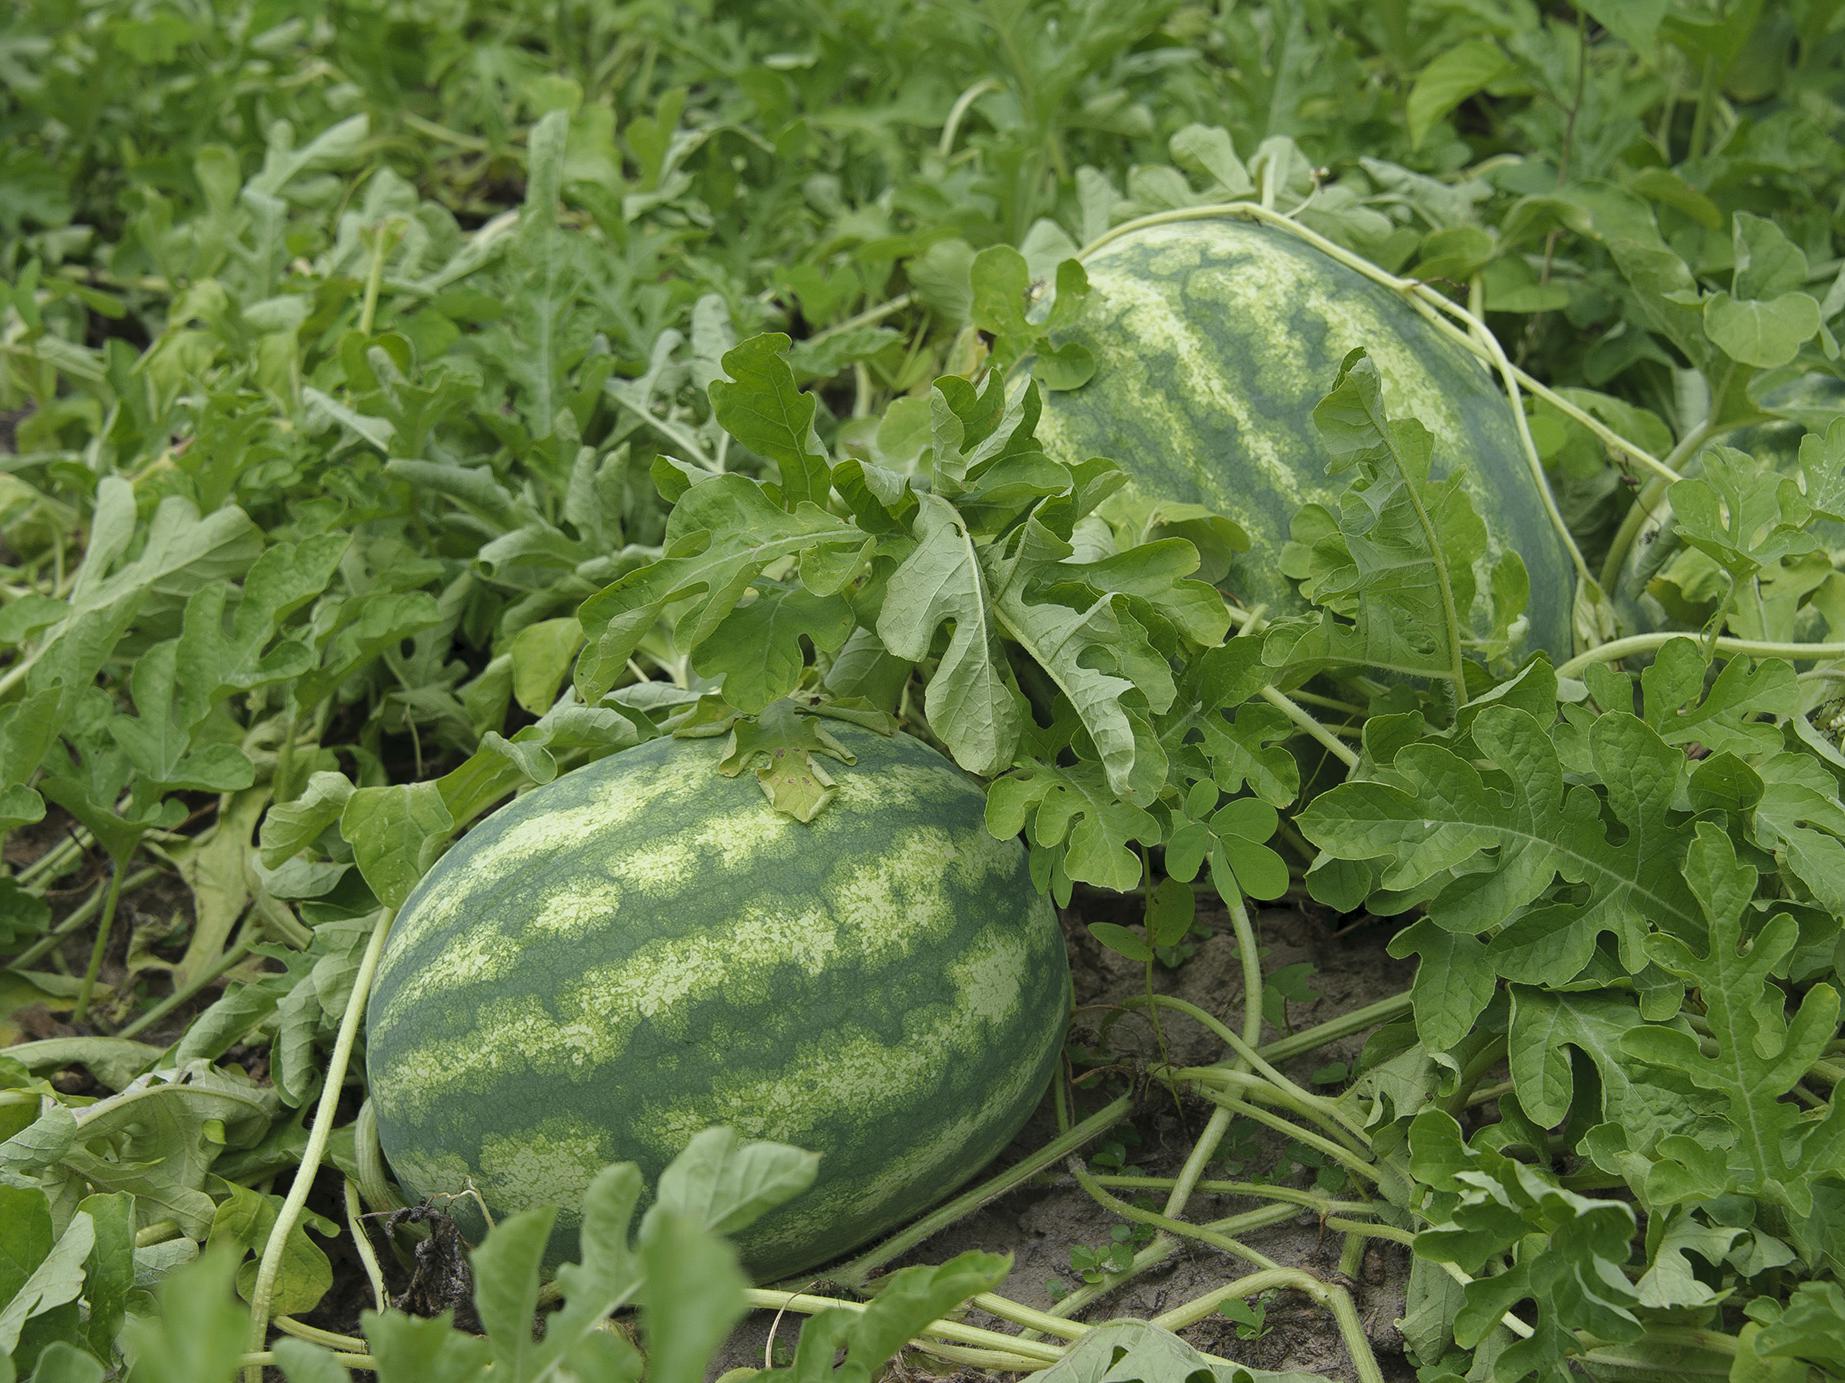 A watermelon with a dark green outer shell and light green stripes rests in a field.